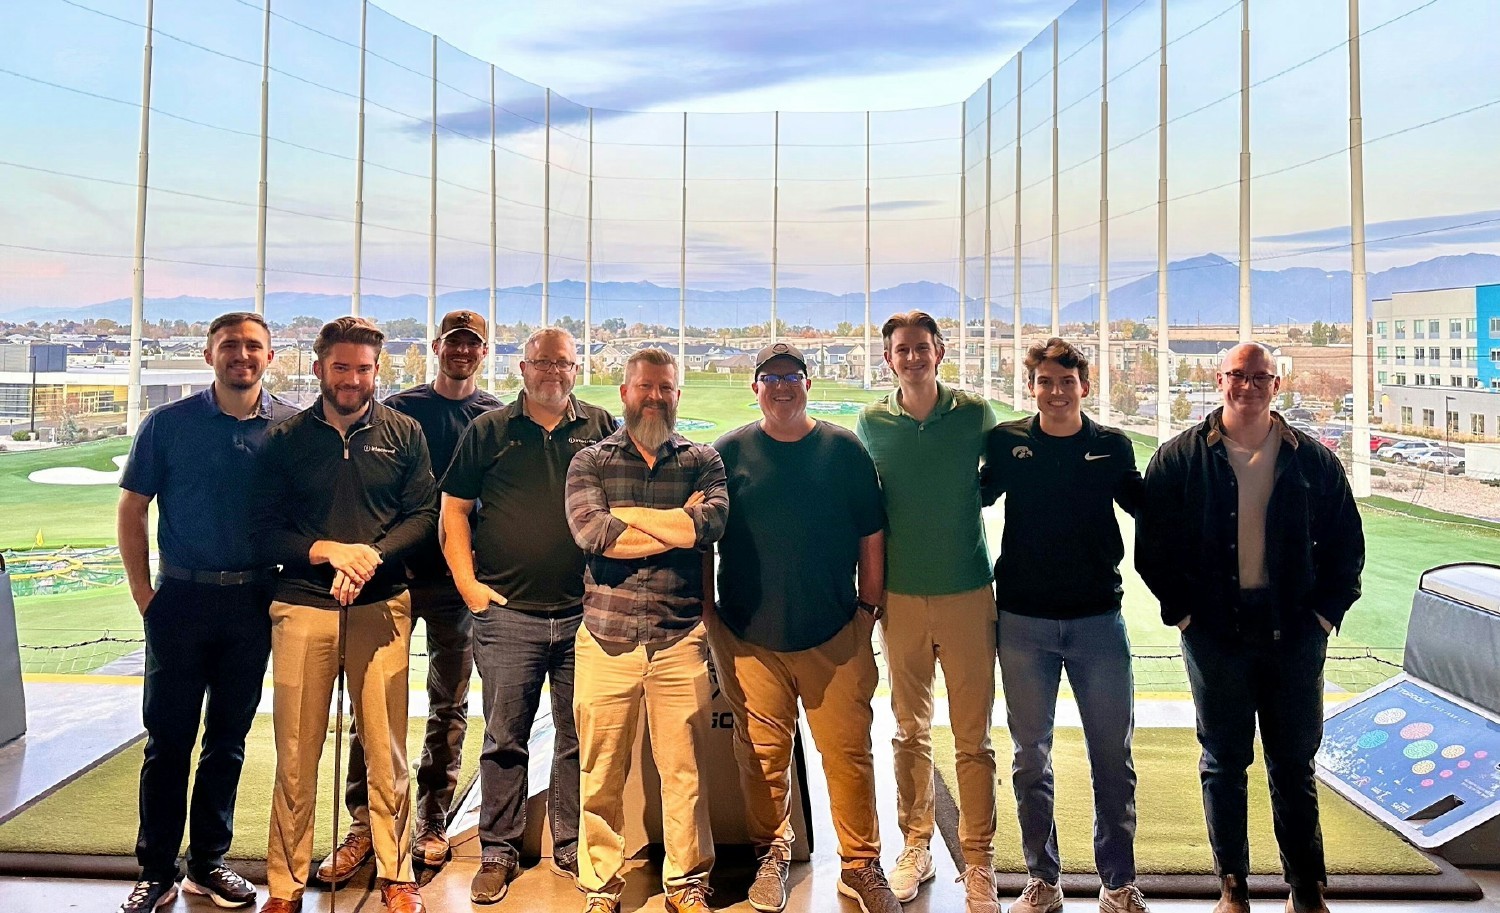 Taking a break from Workday training for a little friendly competition at TopGolf in Illinois